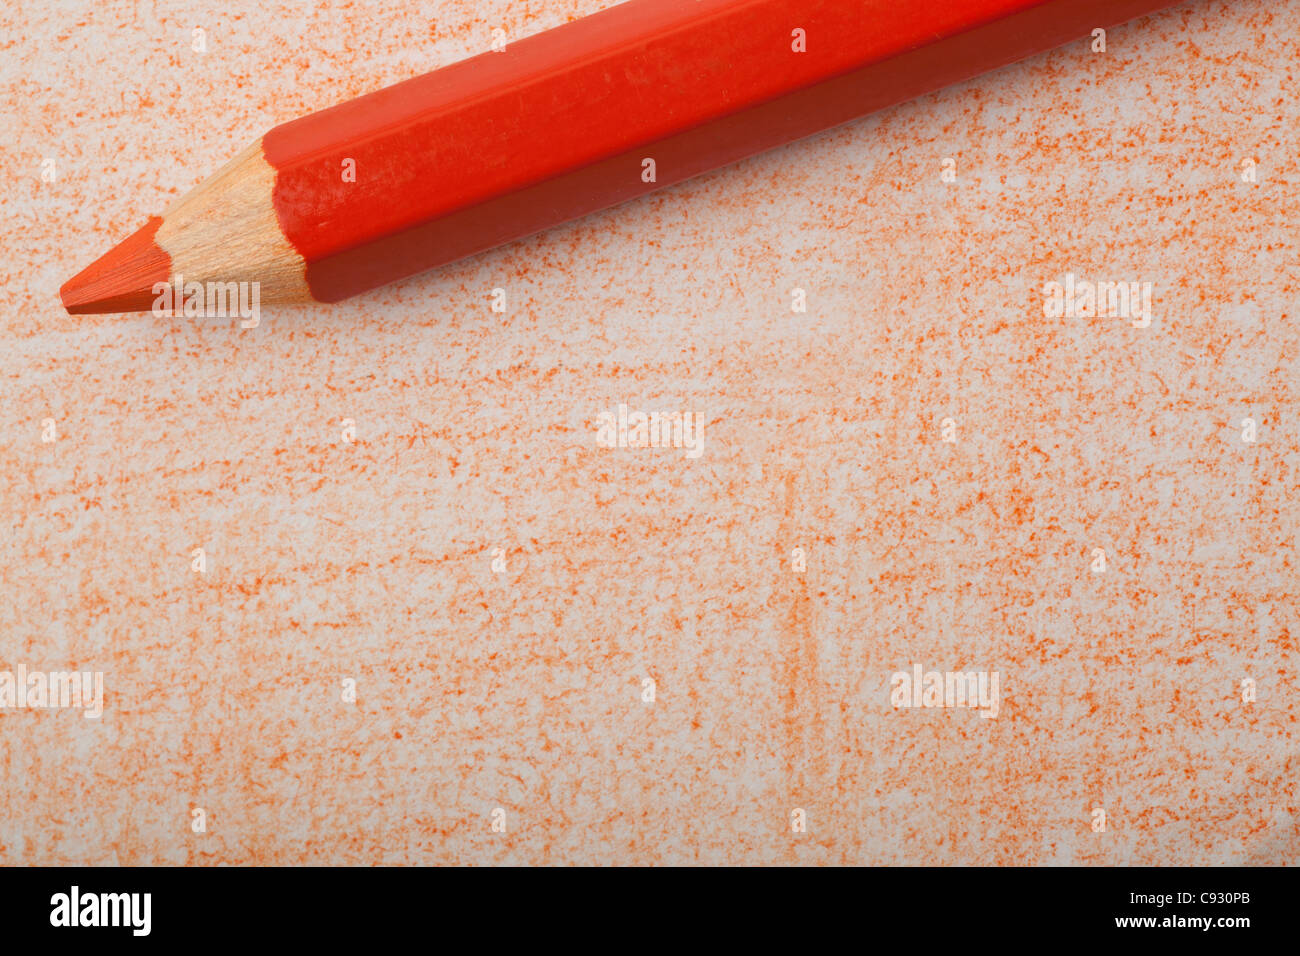 Orange color pencil with coloring on a piece of paper Stock Photo